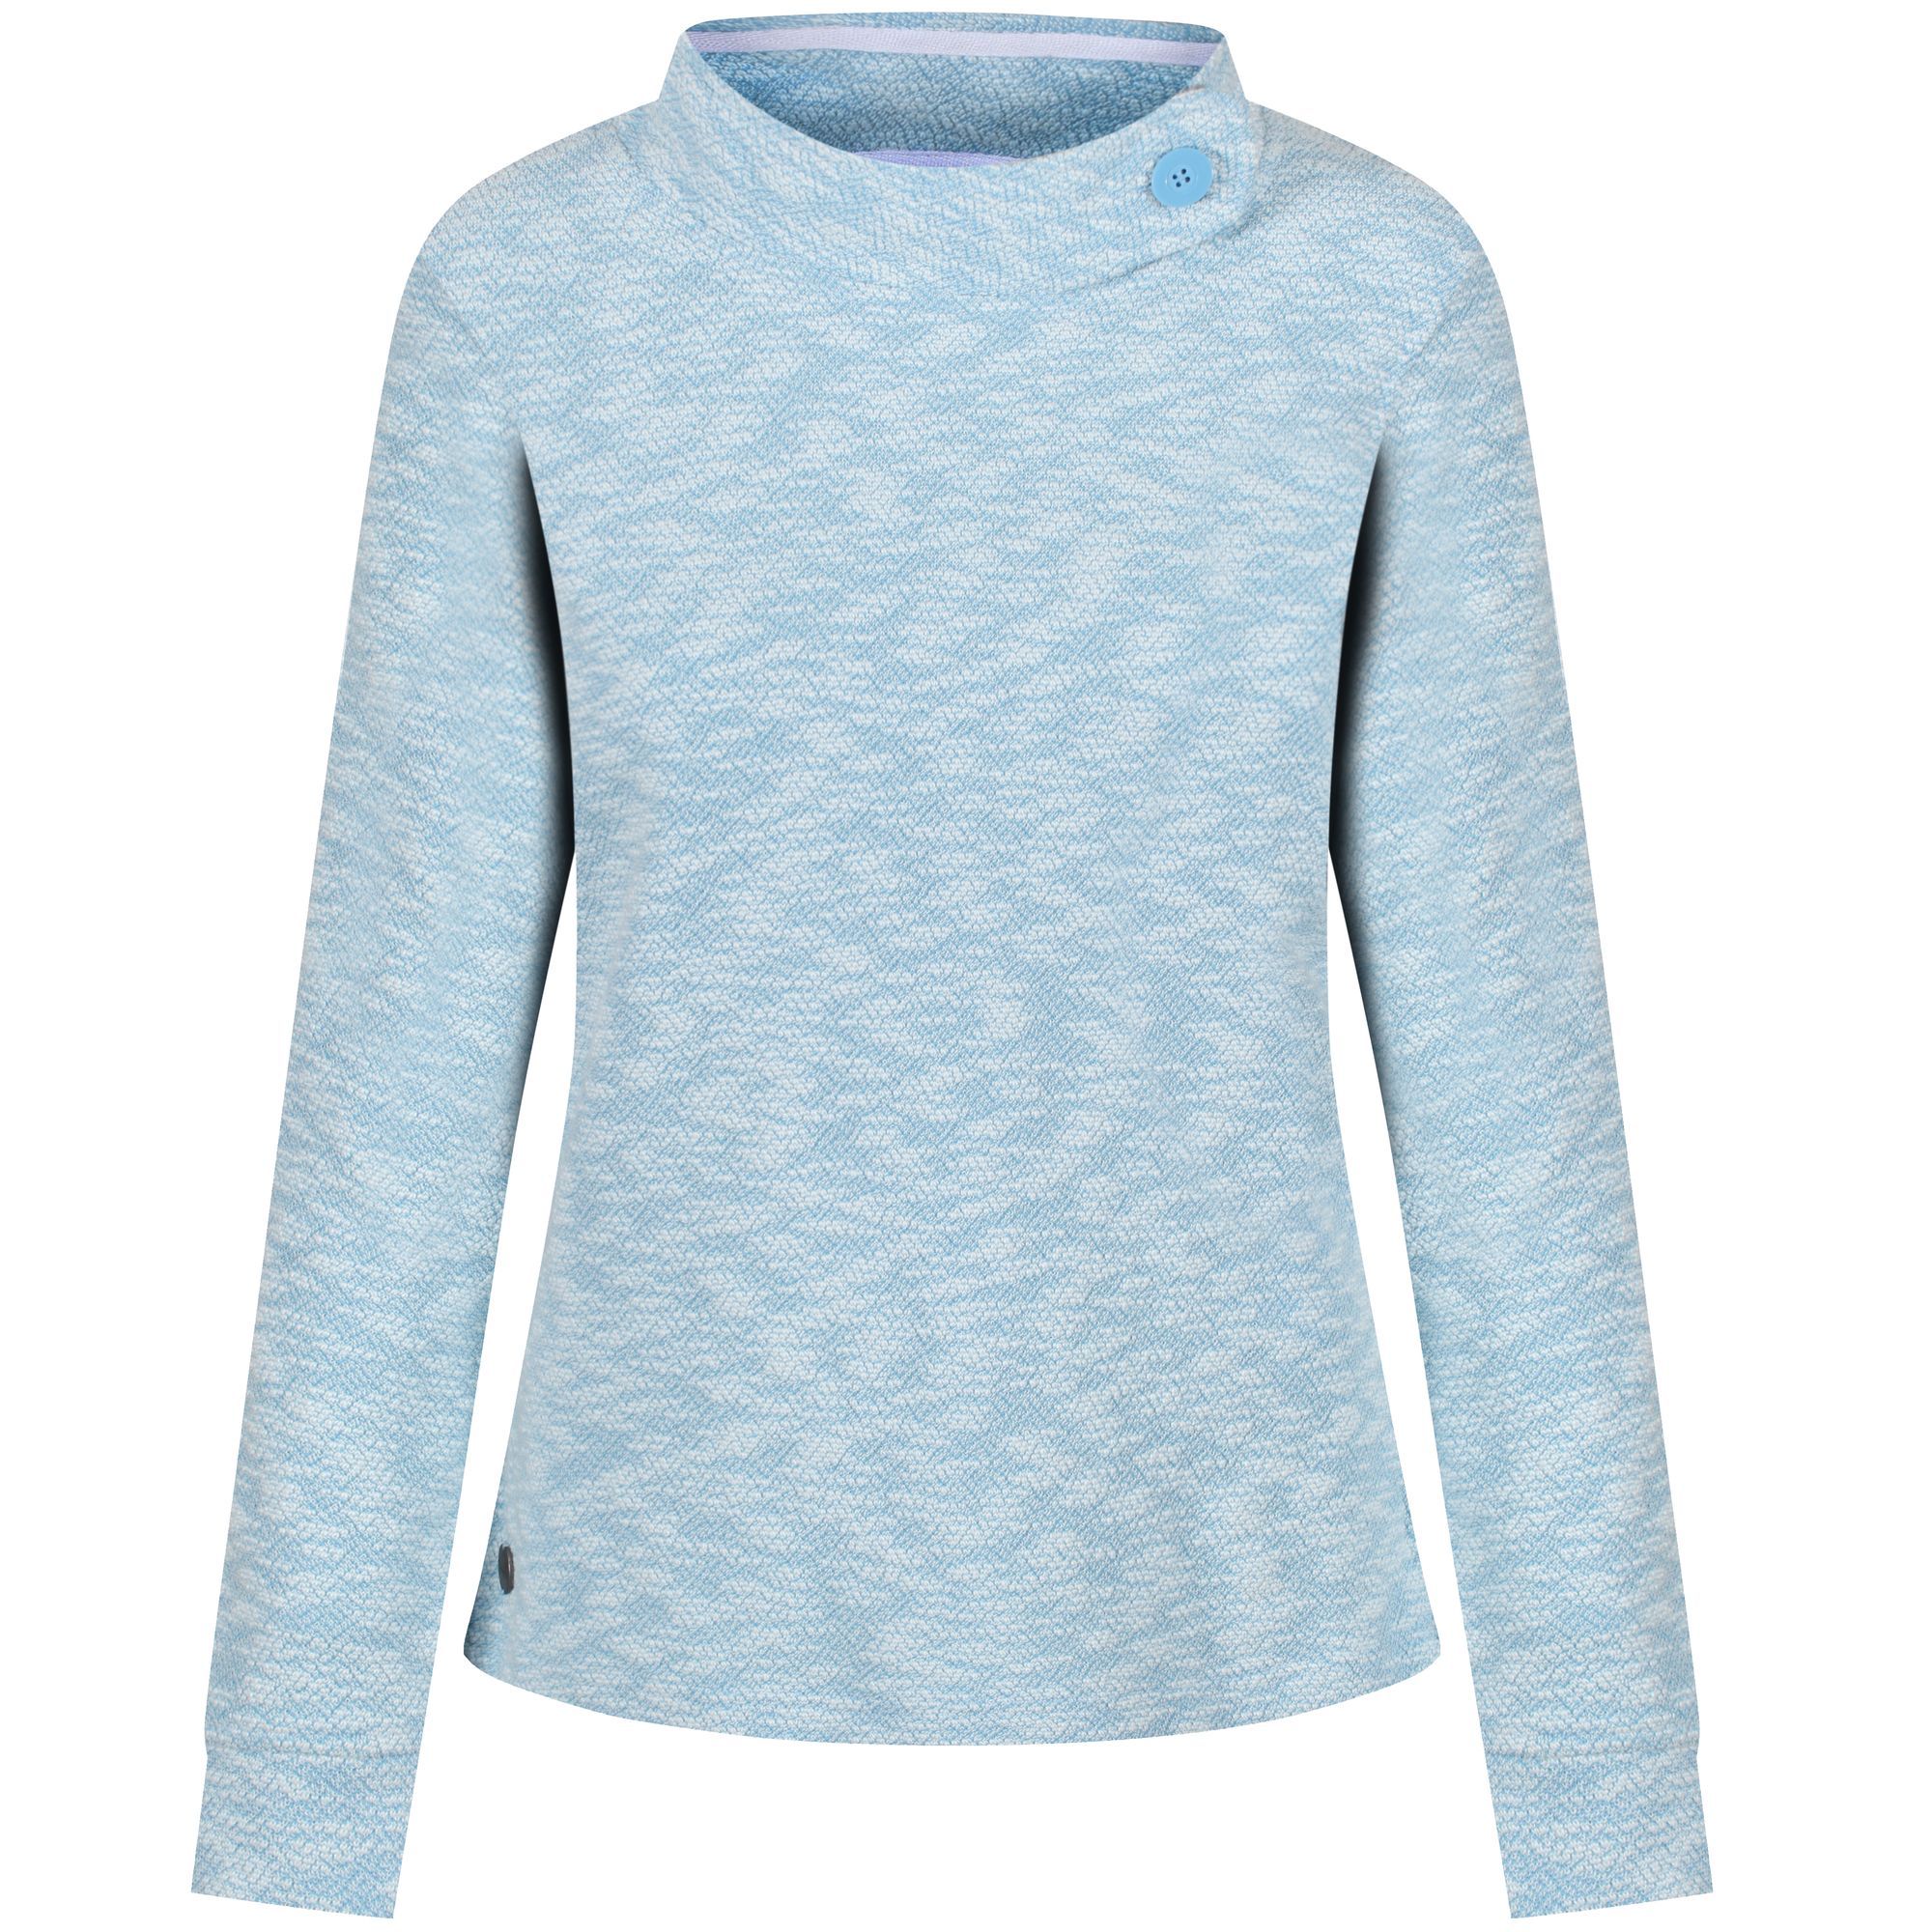 97% Polyester, 3% Cotton. Fleece jumper made from 290gsm Slub face with knit back fabric. New fashion neckline with branded button fastening. Machine wash.